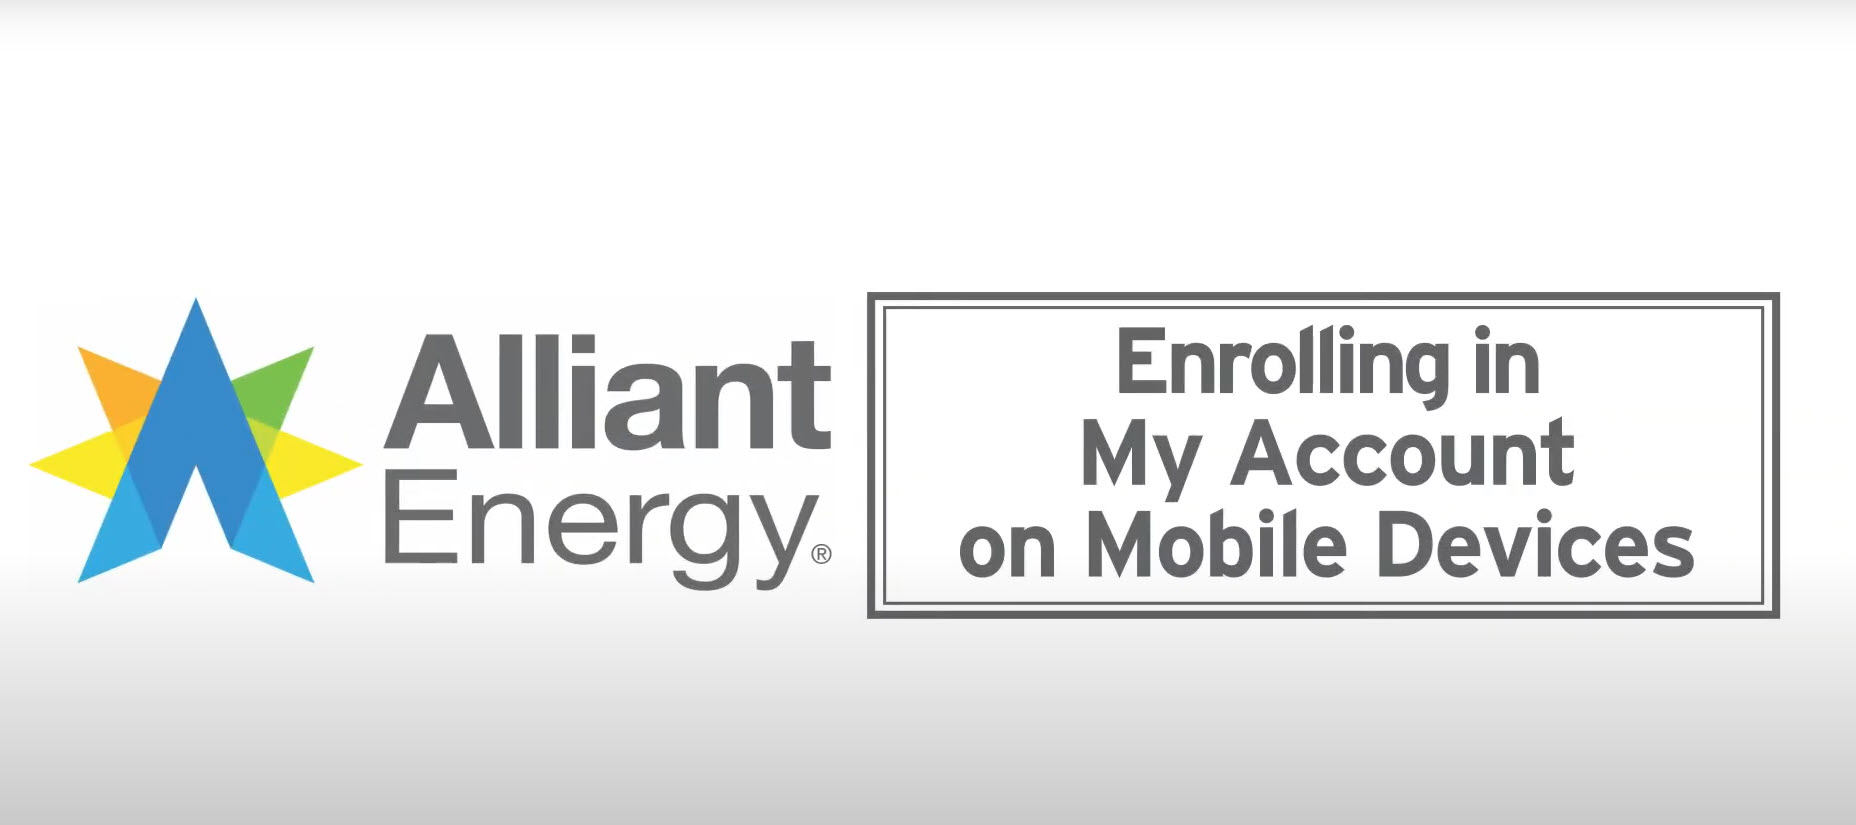 Enrolling in My Account on Mobile Devices